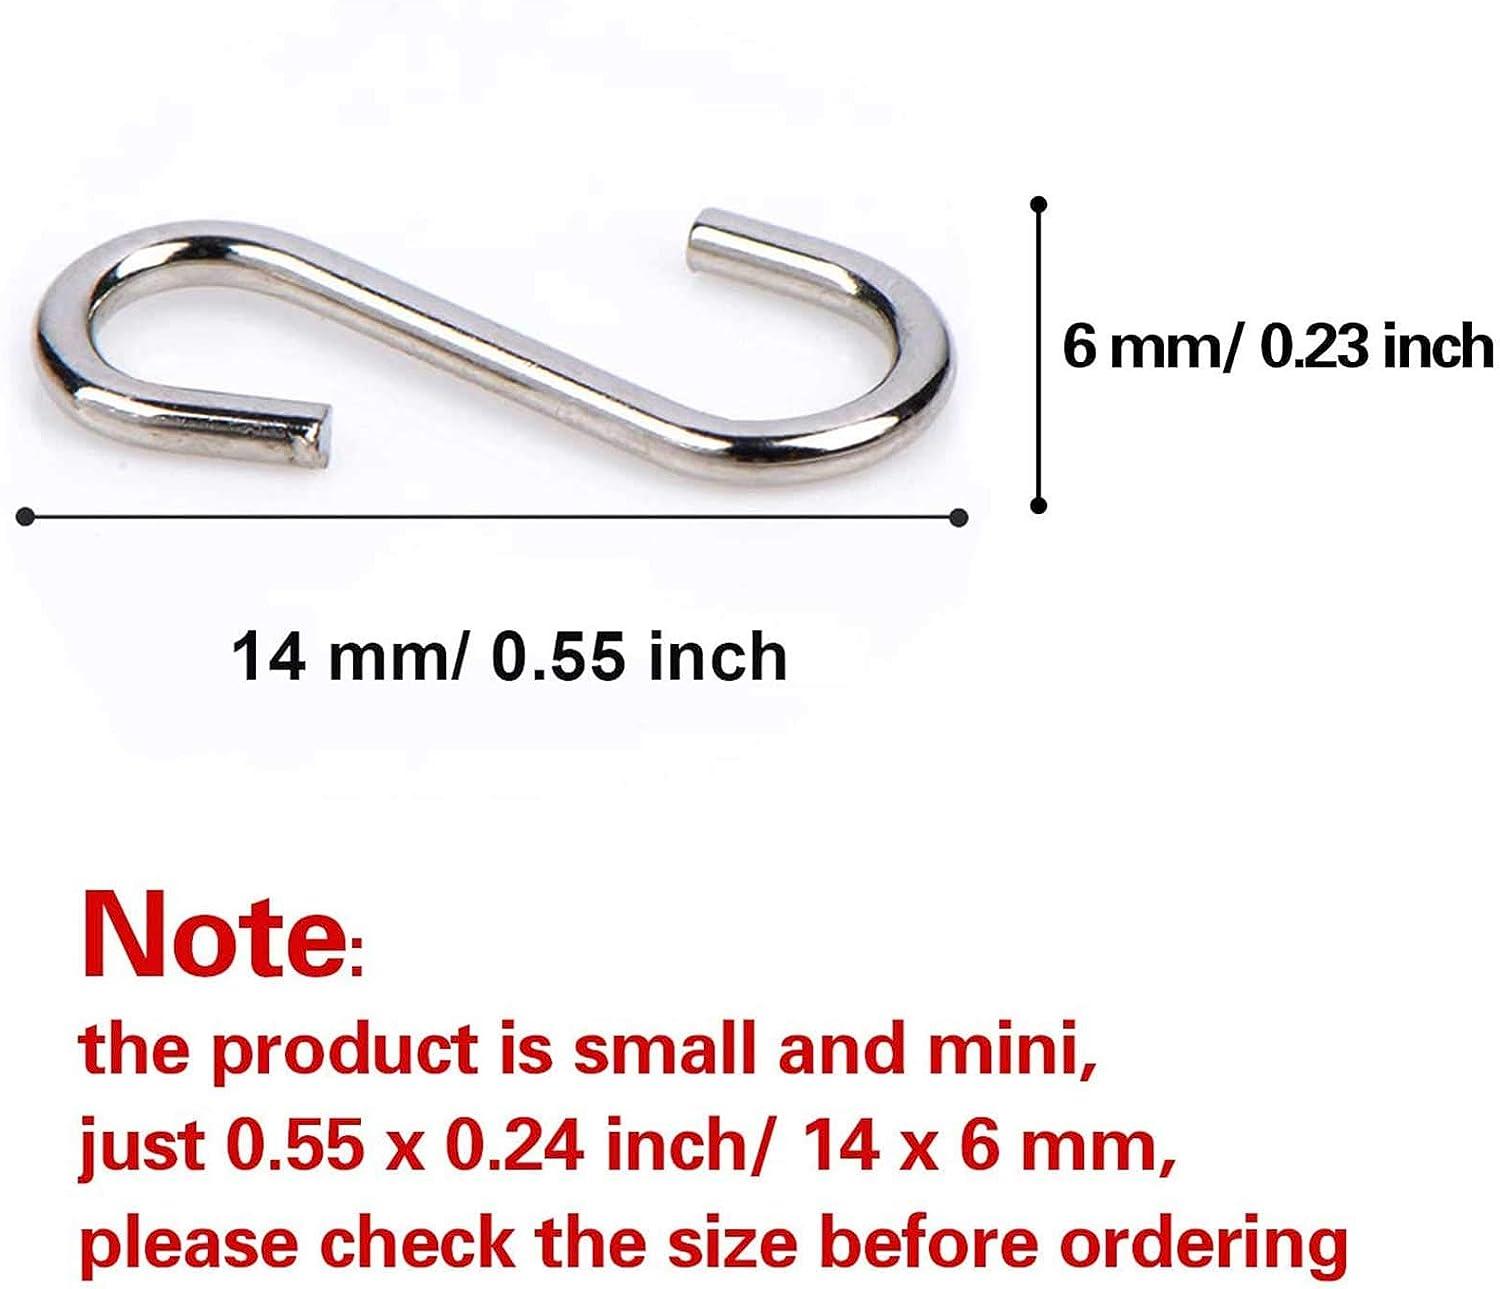 35pcs Small S Hooks Connectors Metal S Shaped Wire Hook Hangers Hanging  Hooks for DIY Crafts, Hanging Jewelry, Key Chain, Tags, Fishing Lure, Net